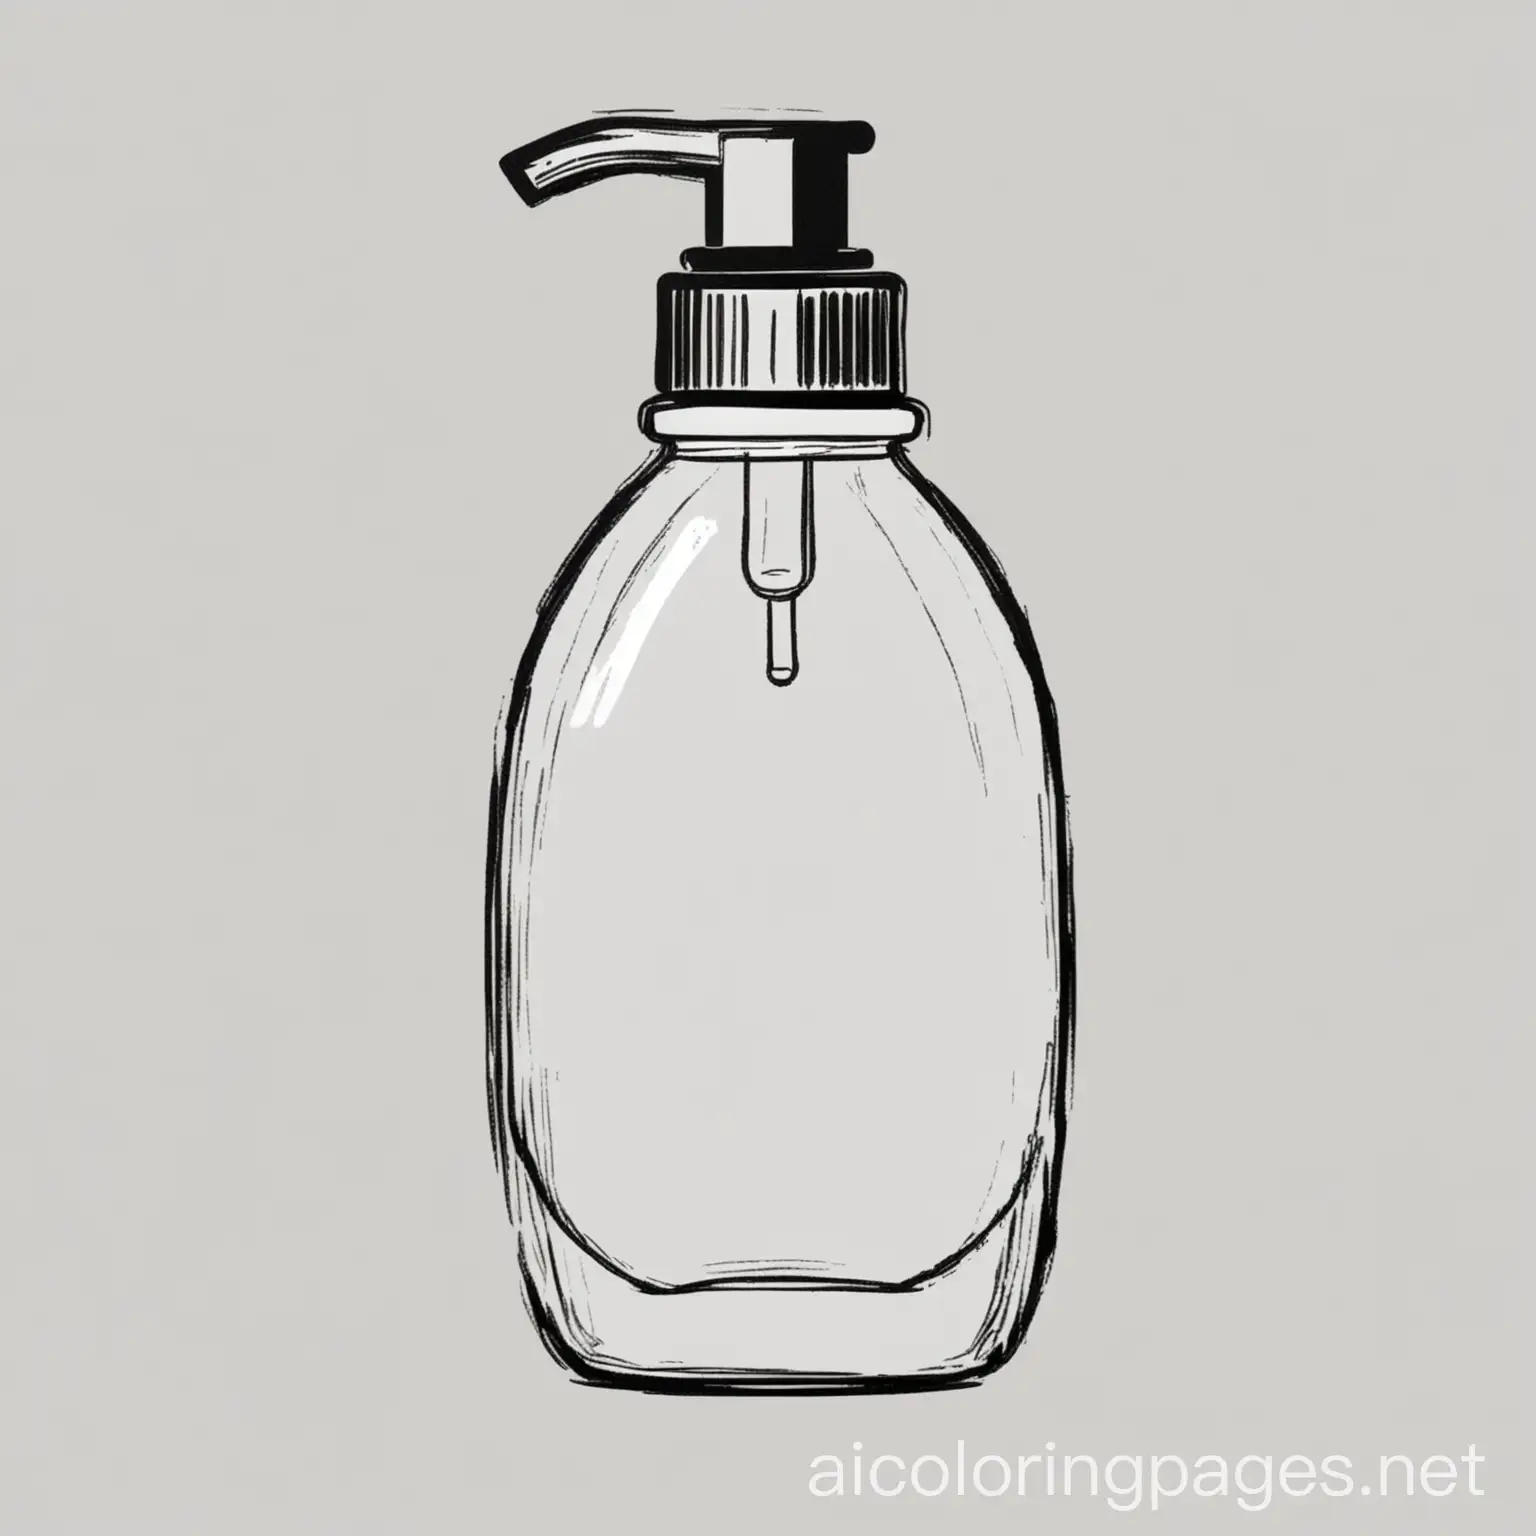 Illustrate a simple, black-and-white line drawing of a foundation bottle for a kids' coloring page. The bottle should have an oval body with a flat base and a squeeze nozzle on top. Use bold, clean lines to outline the shape of the bottle and nozzle. Ensure the image is monochromatic, featuring only black lines on a white background, providing a smooth and user-friendly representation perfect for coloring., illustration, Coloring Page, black and white, line art, white background, Simplicity, Ample White Space. The background of the coloring page is plain white to make it easy for young children to color within the lines. The outlines of all the subjects are easy to distinguish, making it simple for kids to color without too much difficulty